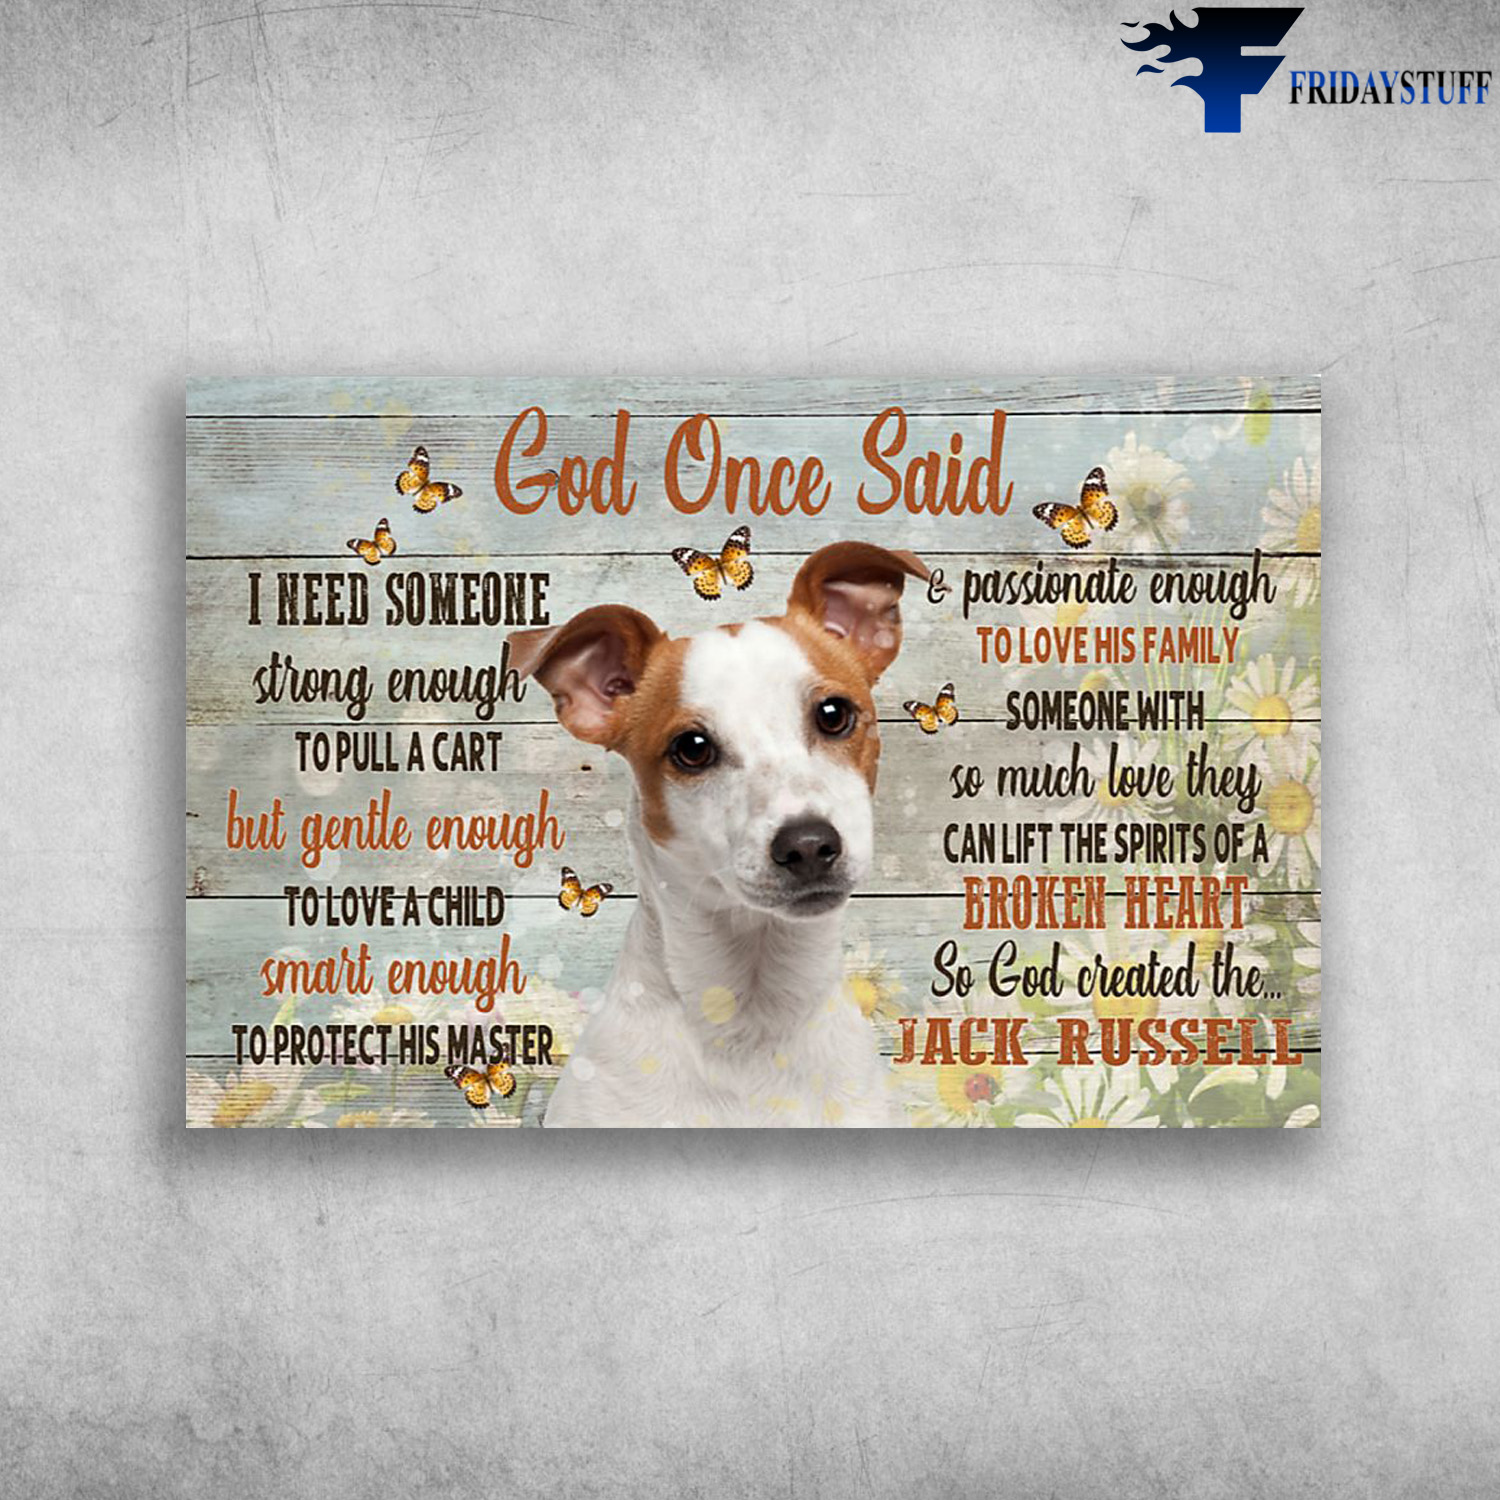 Jack Russell - God Once Said, I Need Someone Strong Enough To Pull A Cart, But Gentle Enough To Love A Child, Smart Enough To Protect His Master, Passionate Enough To Love His Family, Someone With So Much Love They Can Lift The Spirits